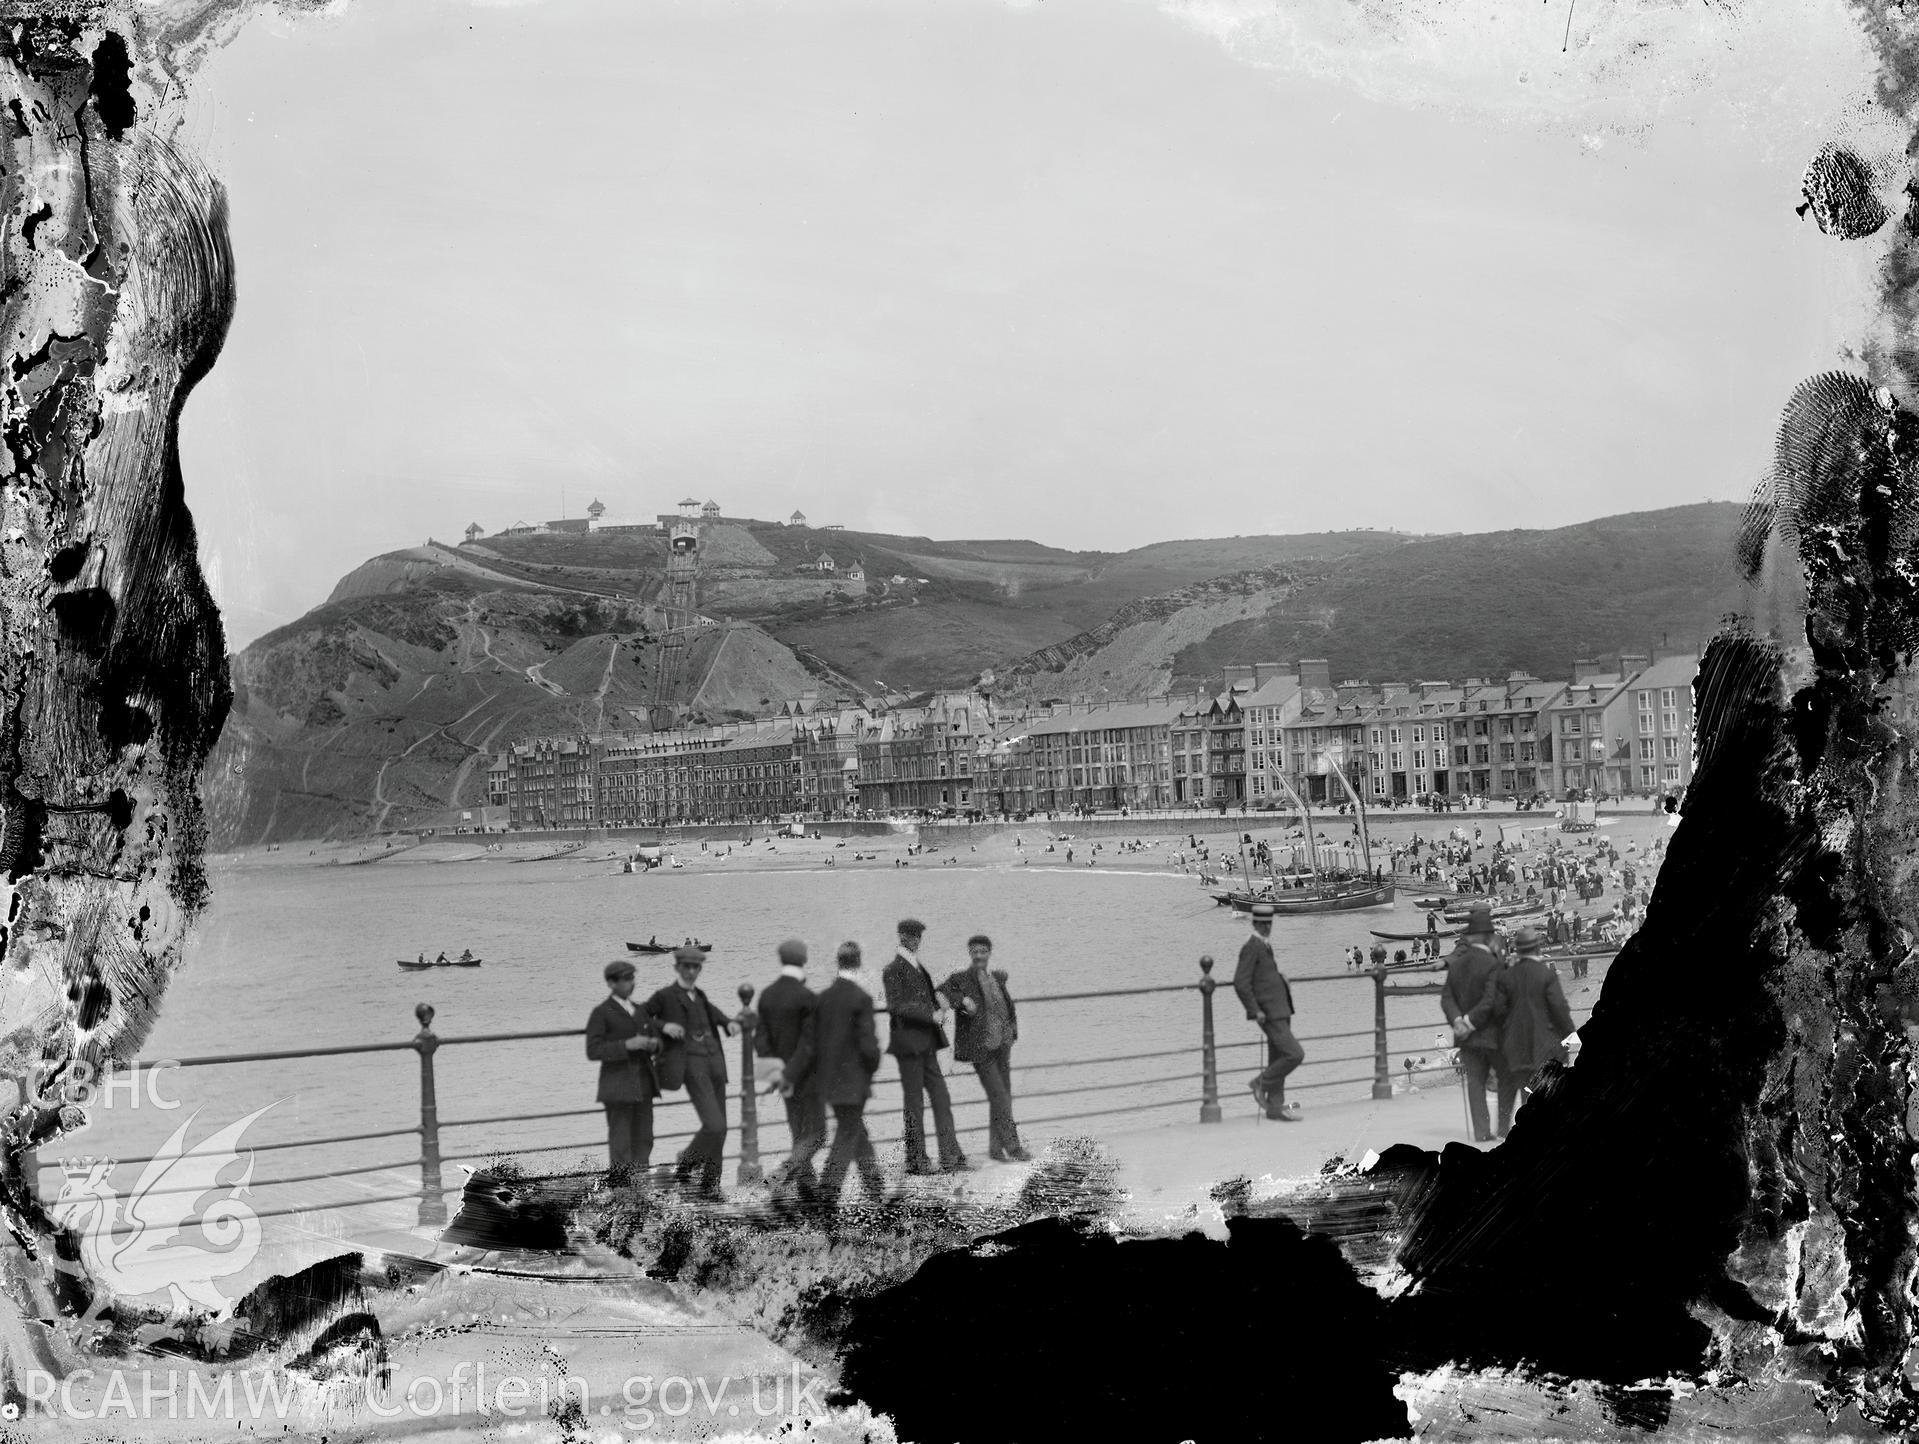 Black and white image dating from c.1910 showing a view of a busy beach and promenade at Aberystwyth taken from the castle side,  taken by Emile T. Evans.